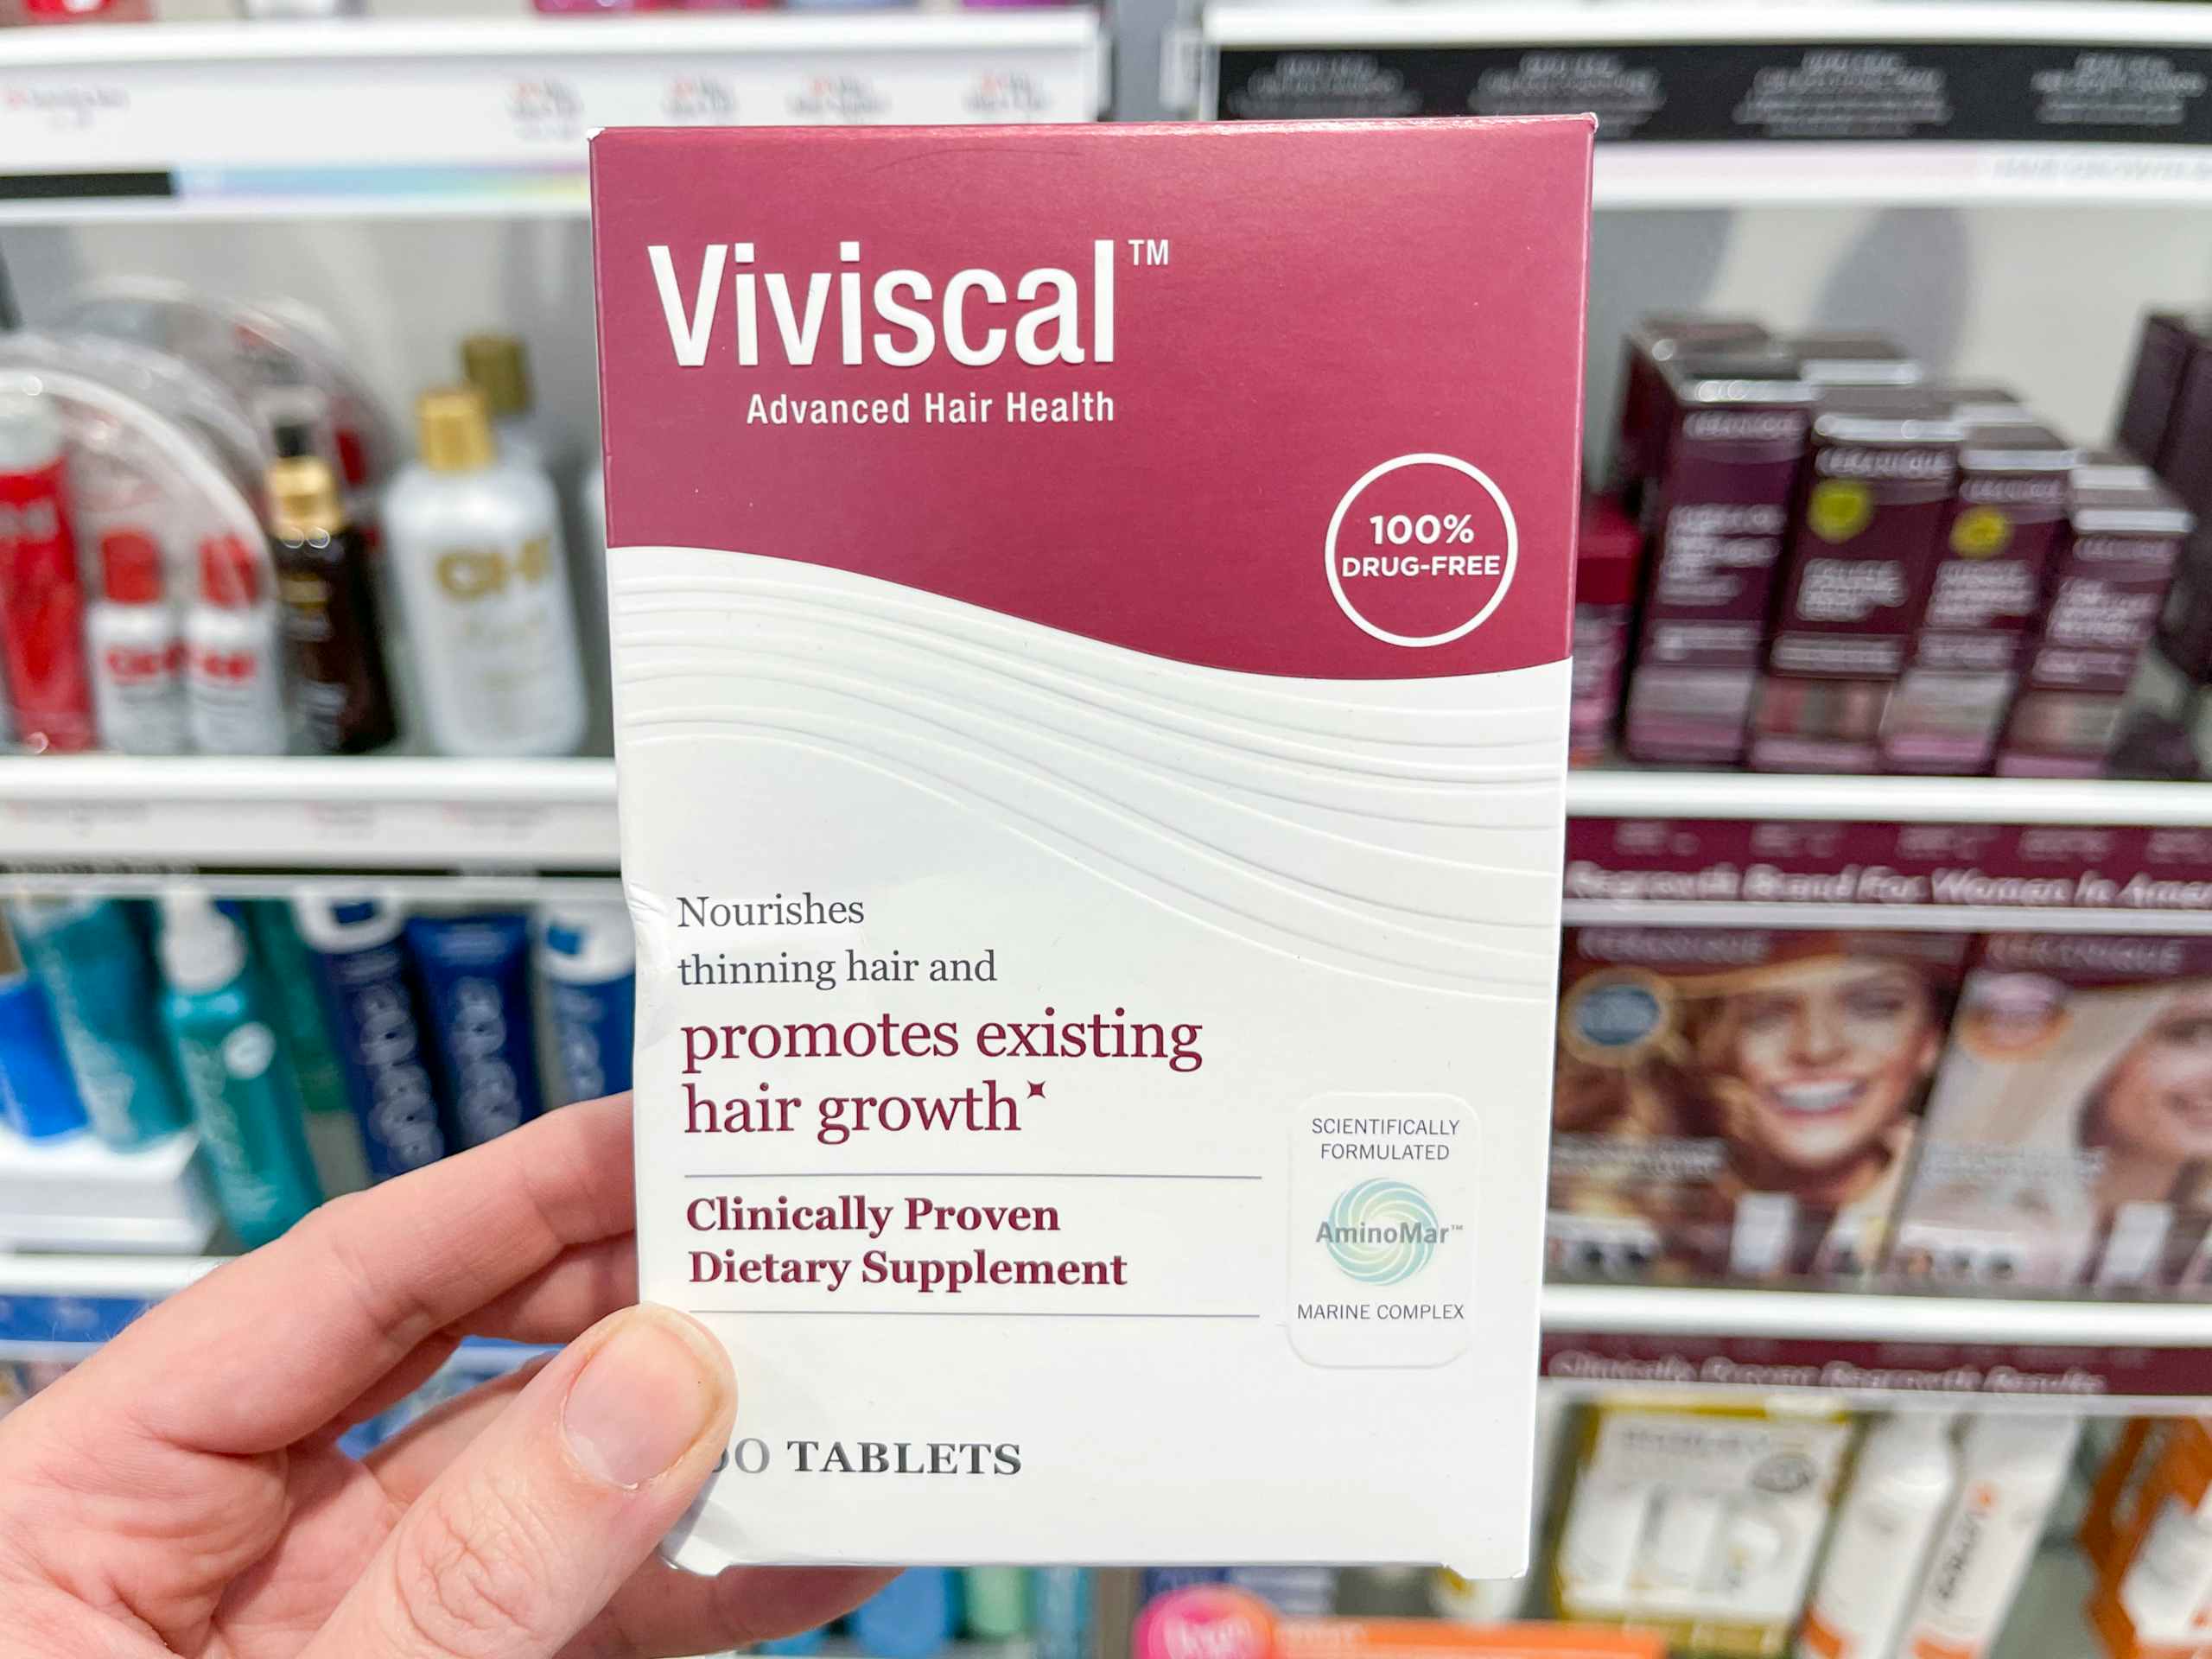 Woman holding box of Viviscal hair growth supplements.